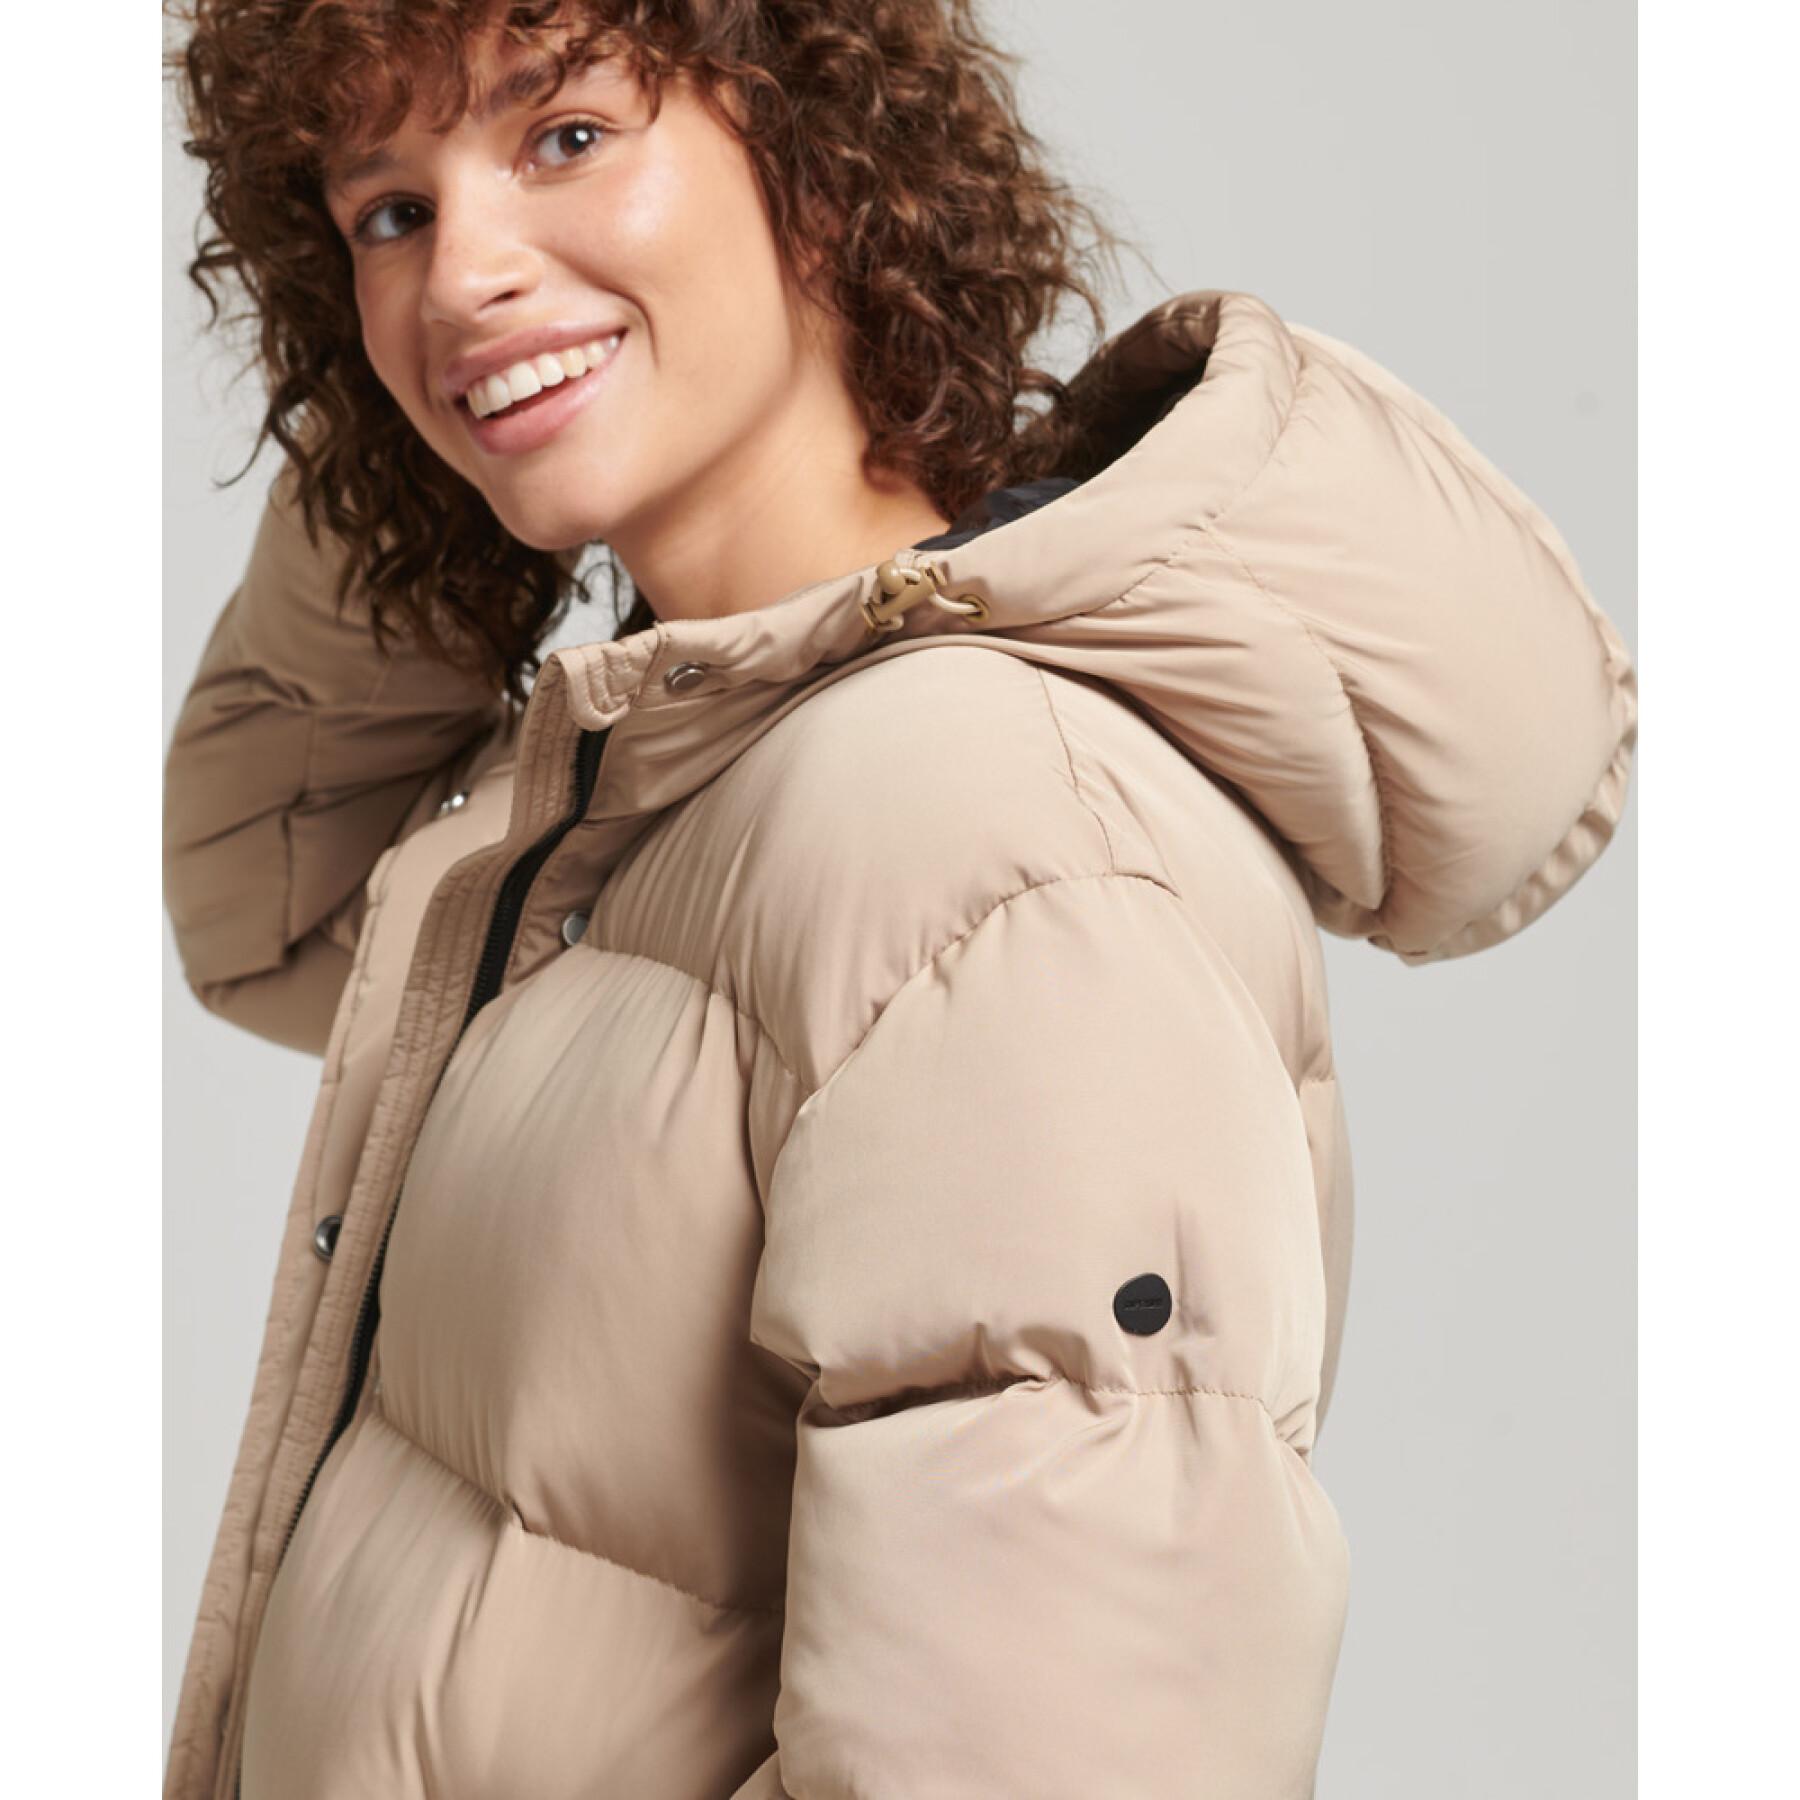 Long Hooded  Puffer Jacket for women Superdry